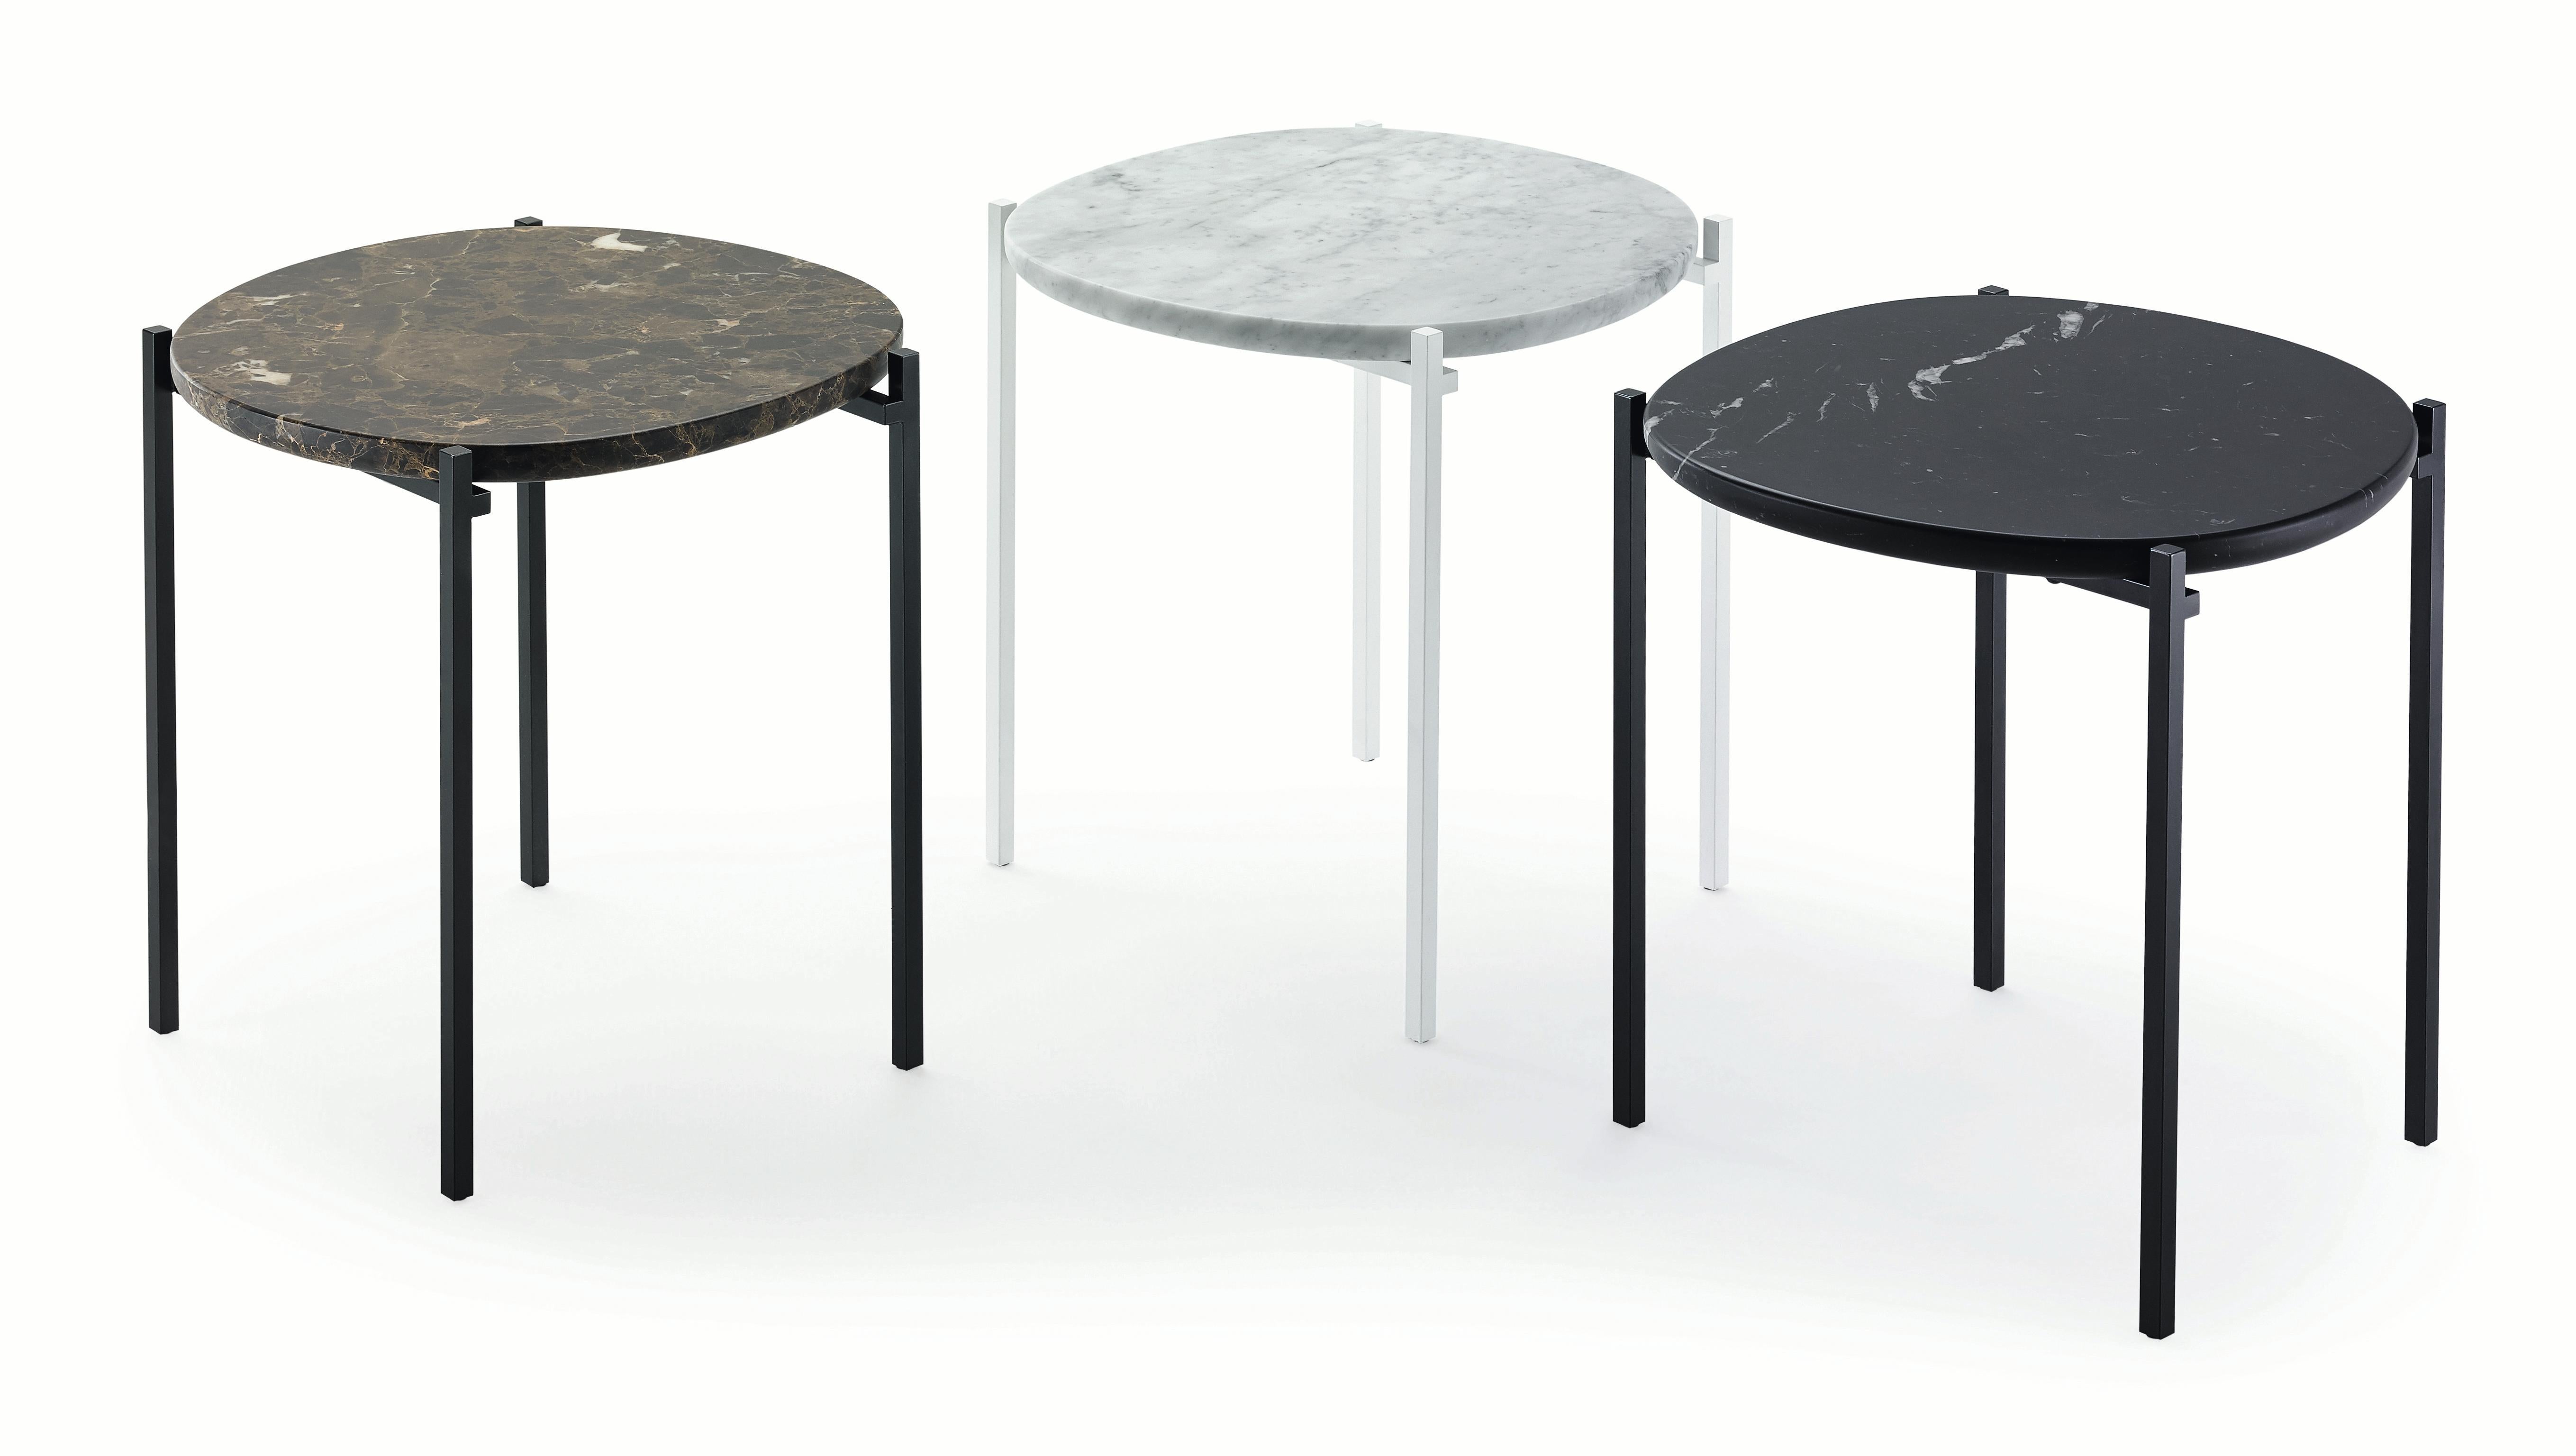 Zanotta Niobe Small Table with Emperador Marble Top by Federica Capitani

Small table. Steel frame painted in the shades black or white. Tops available either in white Carrara marble, in black Marquinia marble or in Emperador marble, with